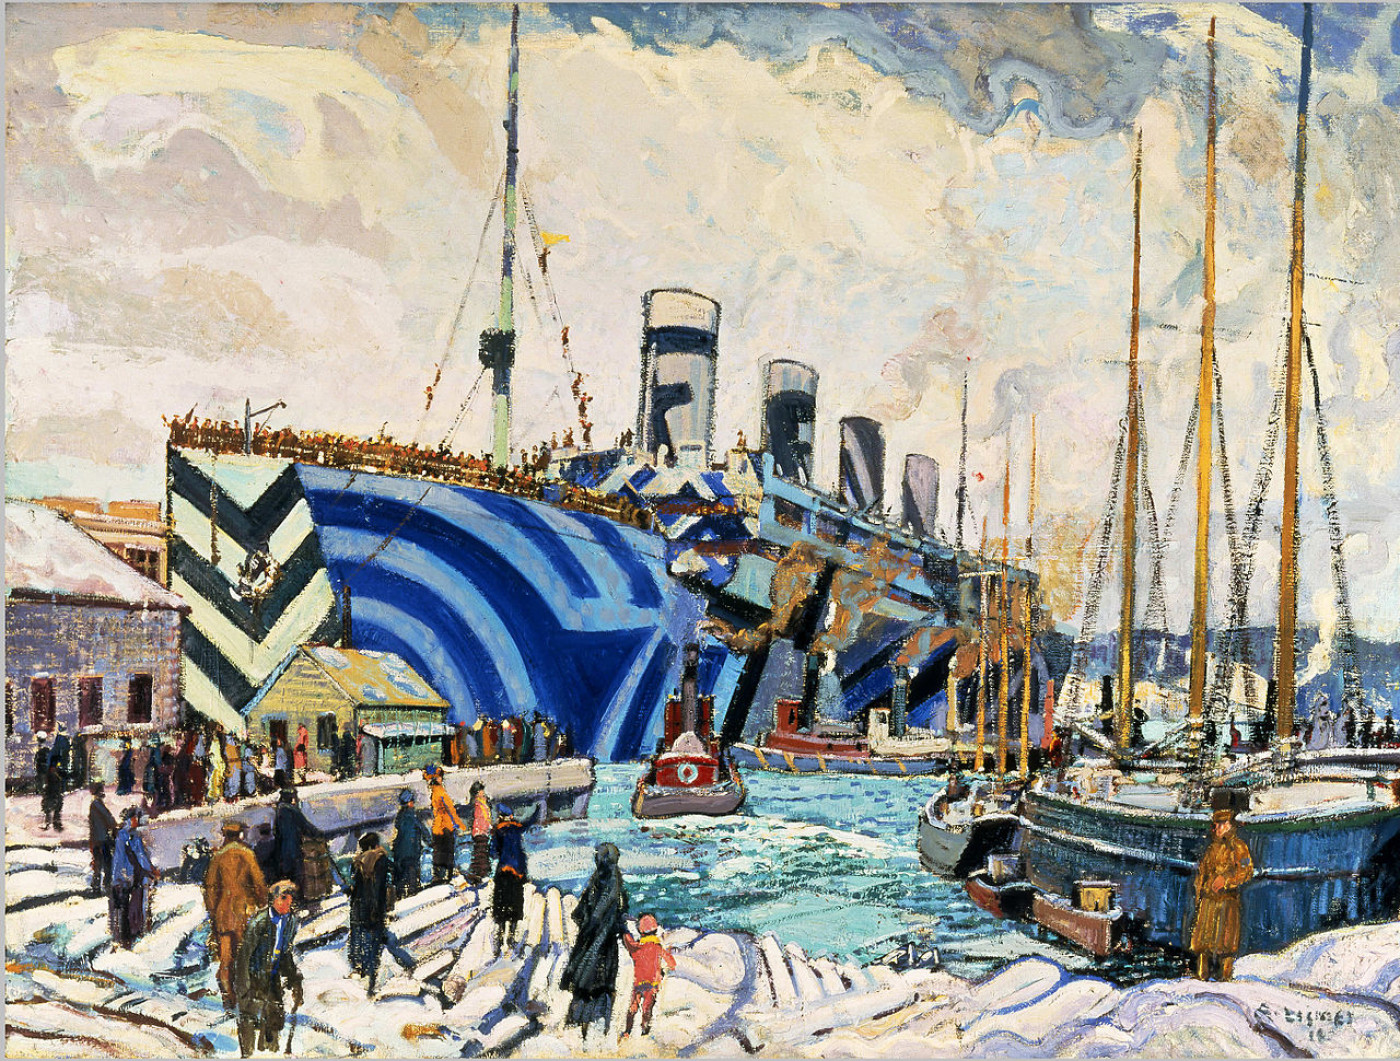 1280px-Arthur_Lismer_-_Olympic_with_Returned_Soldiers-wiki commons